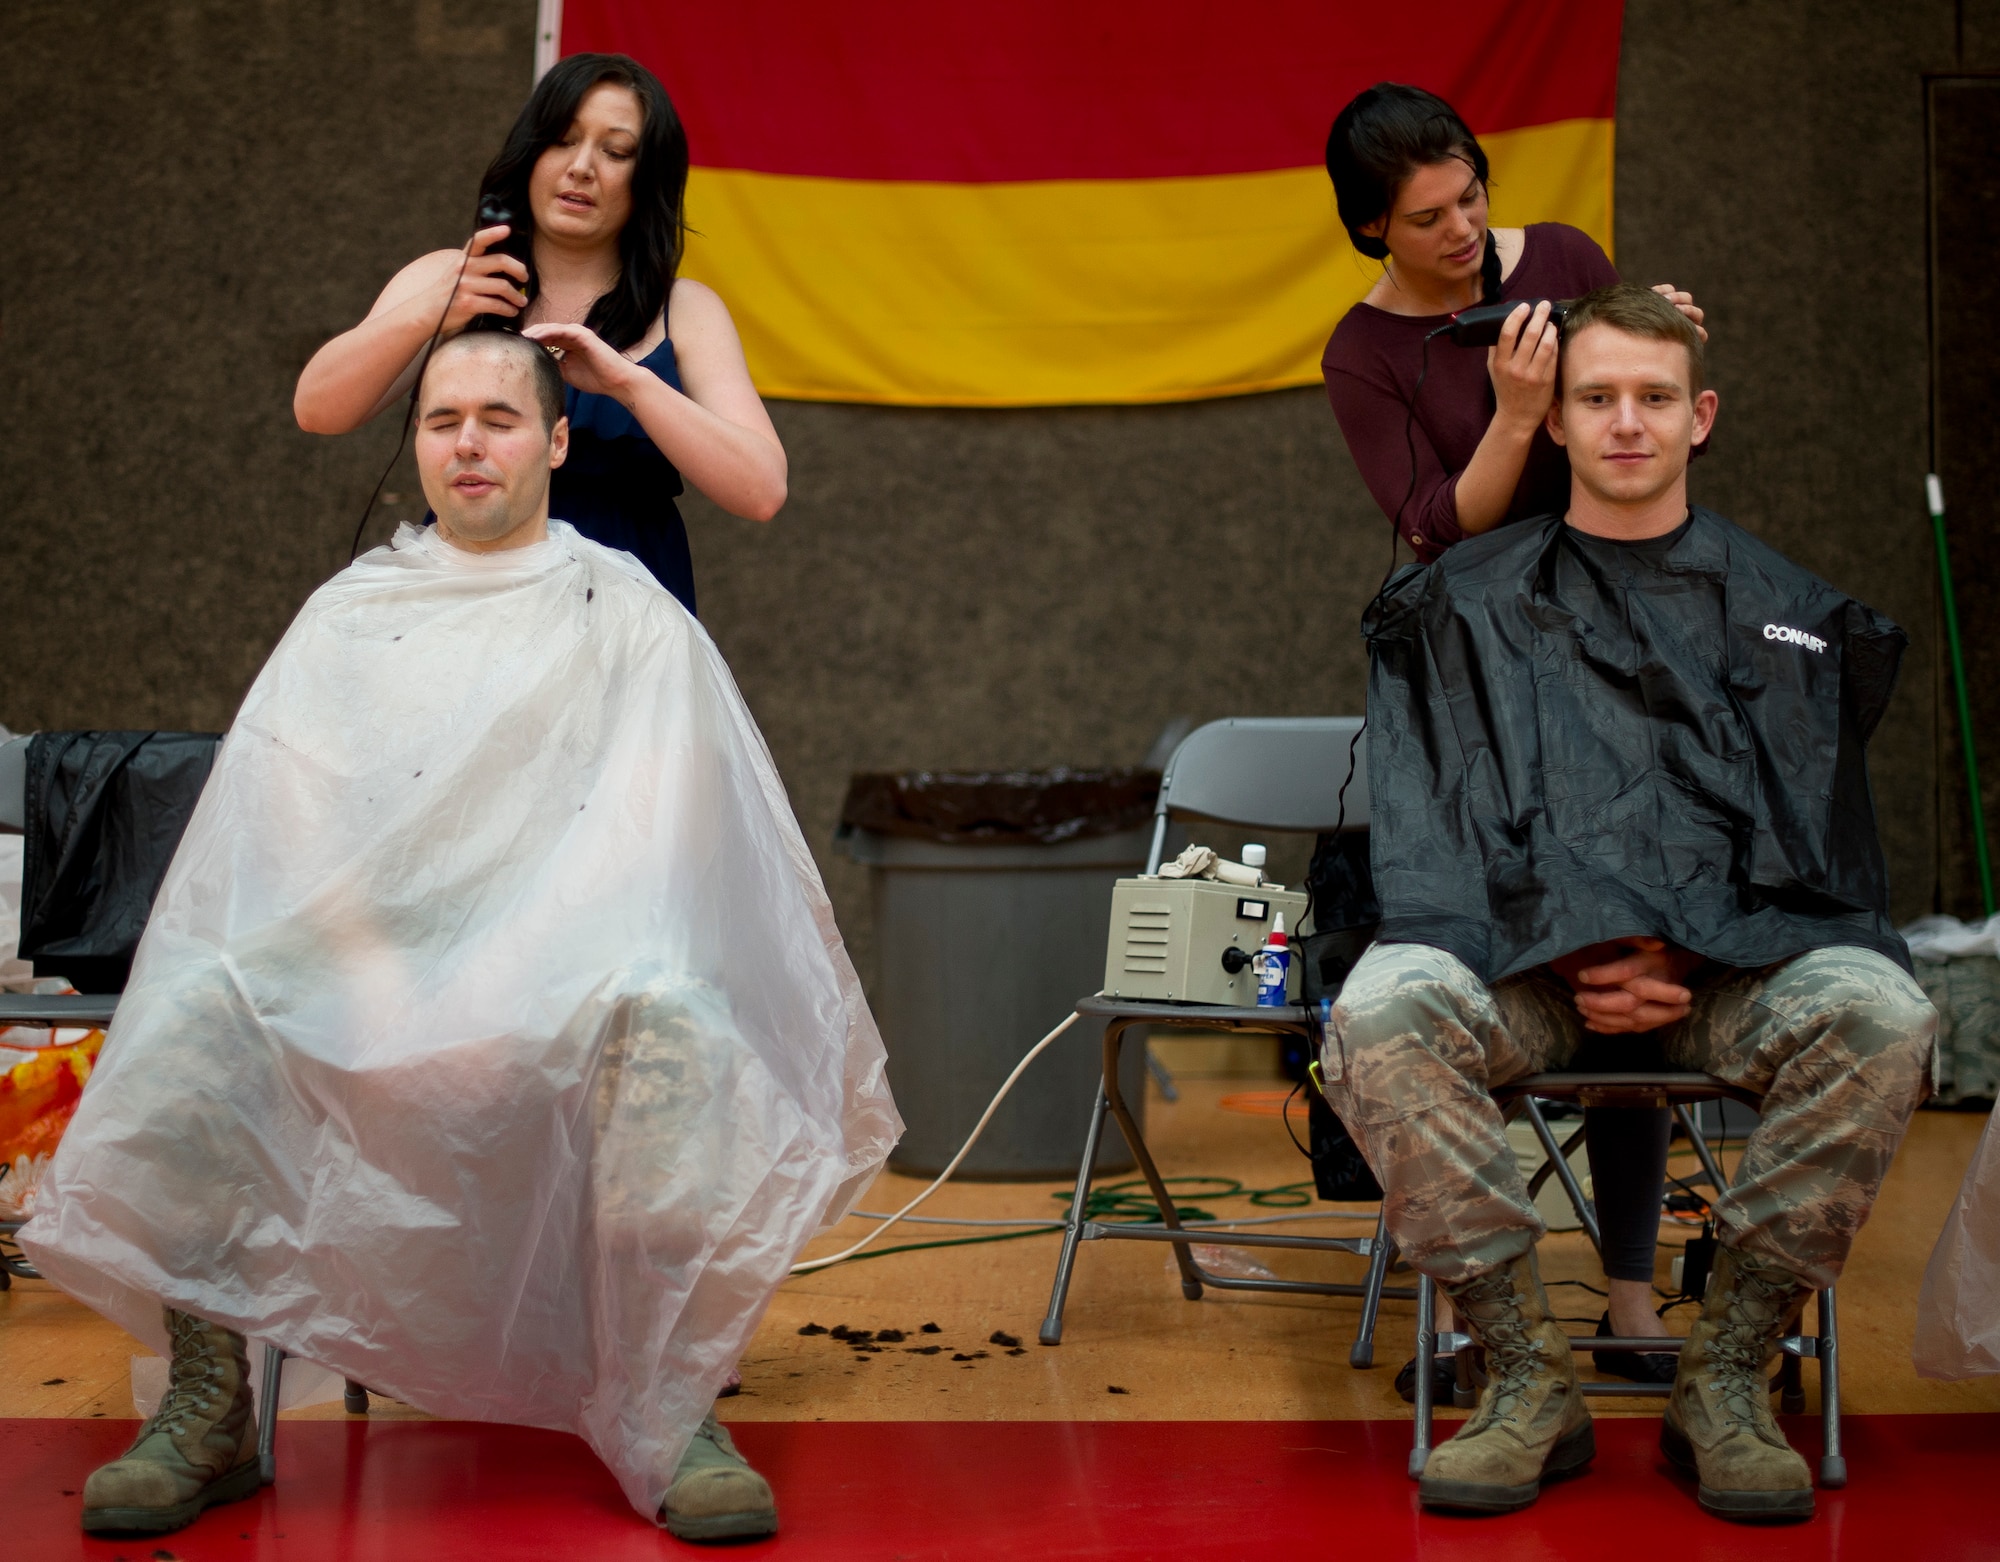 Volunteers for “Go Bald for Brayden” give haircuts to participants April 25, 2014, at Spangdahlem Air Base, Germany, during an event to show support for Brayden Mitchell, 5, recently diagnosed with a form of kidney cancer. Following Brayden’s diagnosis, military members from around the globe have showed their support by shaving their heads. (U.S. Air Force photo by Staff Sgt. Chad Warren/Released)